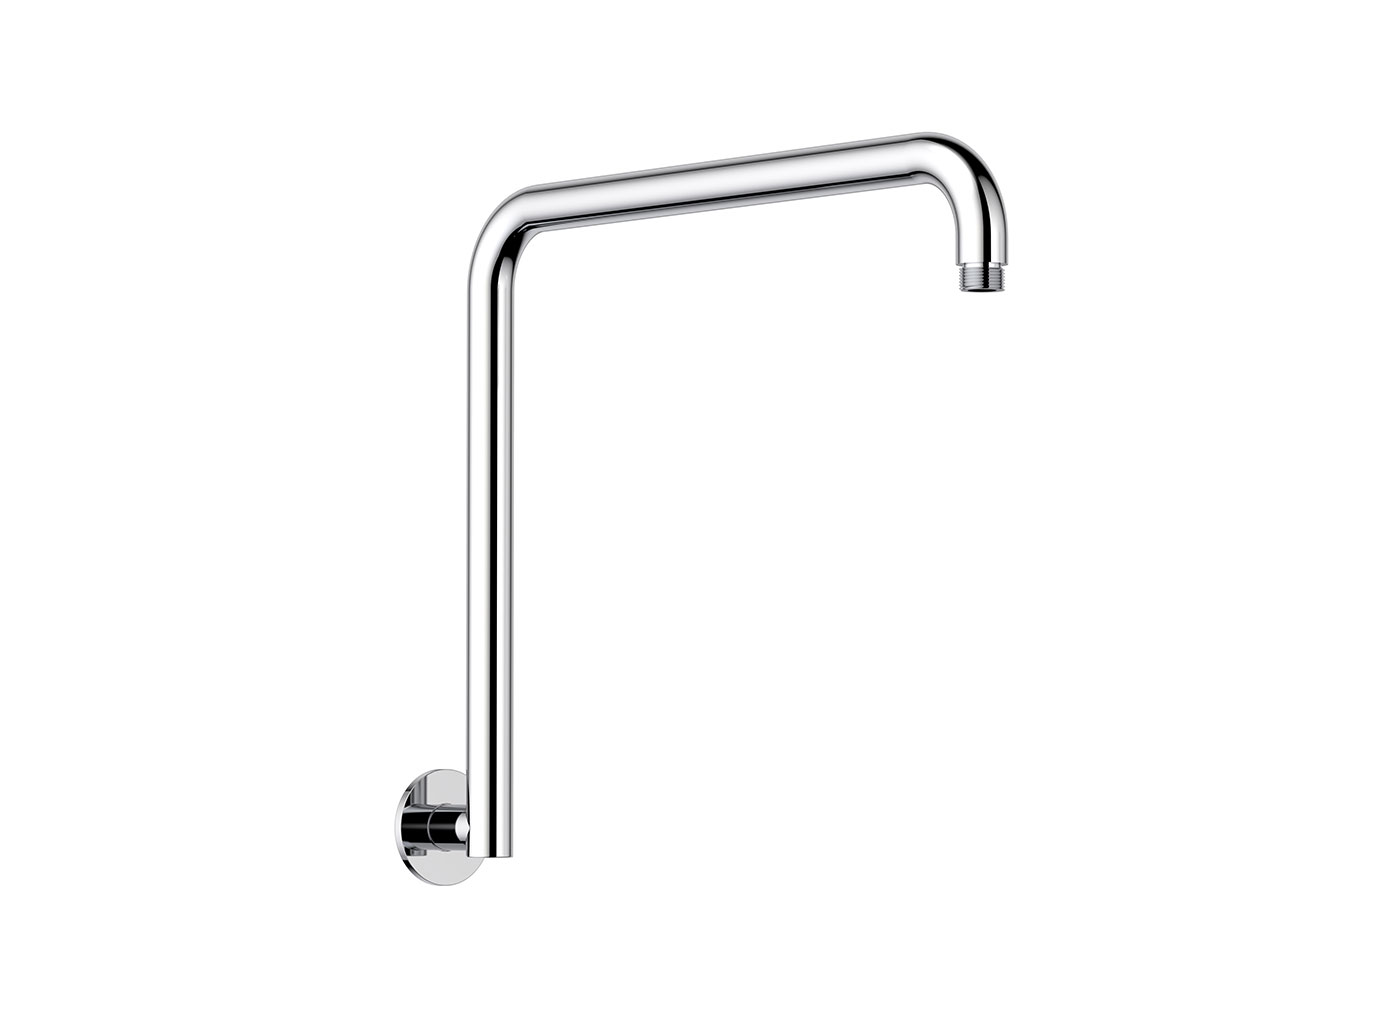 Clark's shower arms come in a variety of styles so you can create a bathroom space you love!